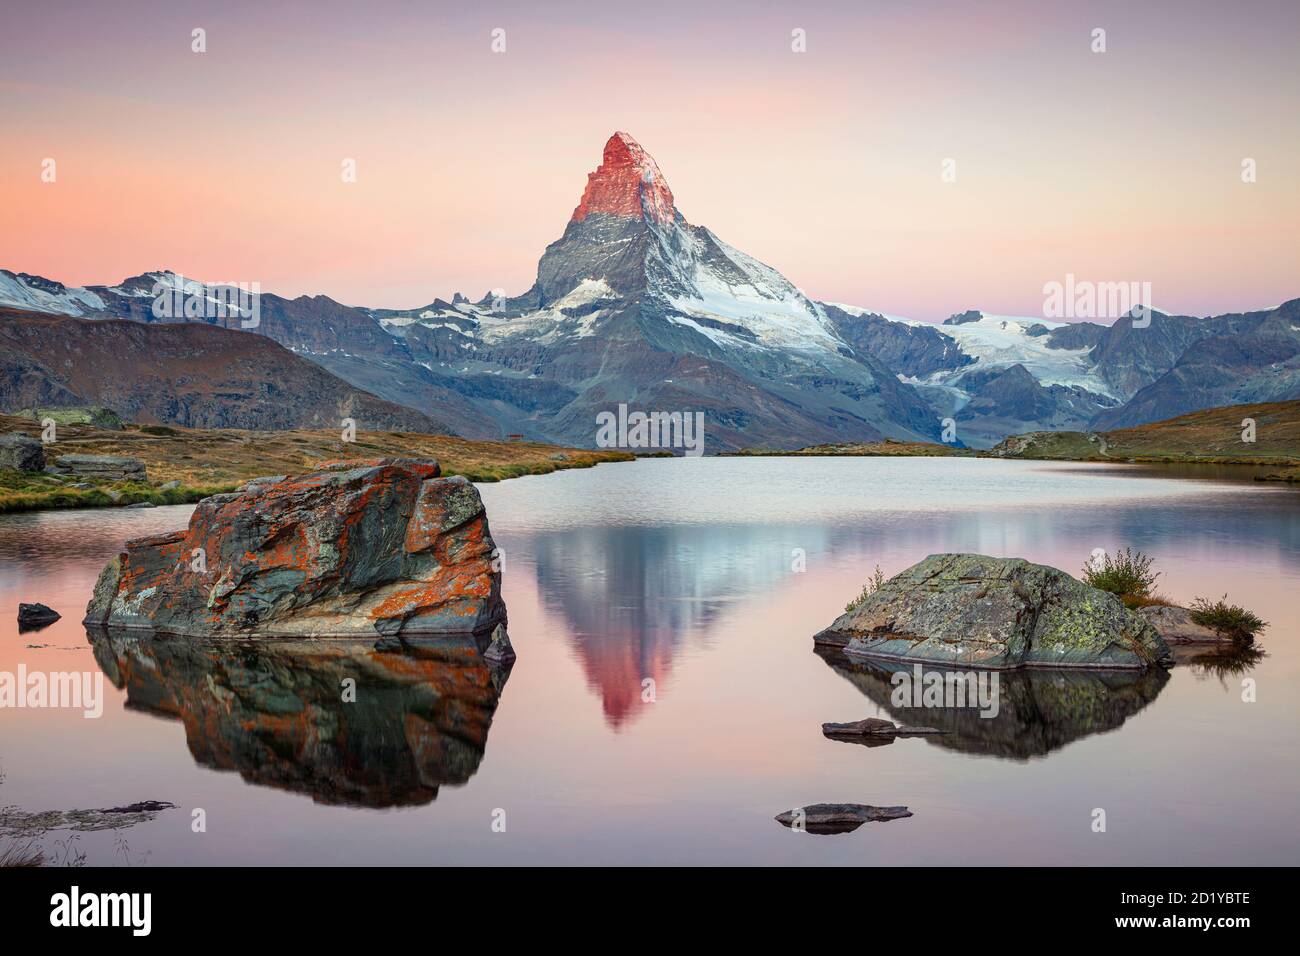 Matterhorn, Swiss Alps. Landscape image of Swiss Alps with Stellisee and Matterhorn in the background during sunrise. Stock Photo